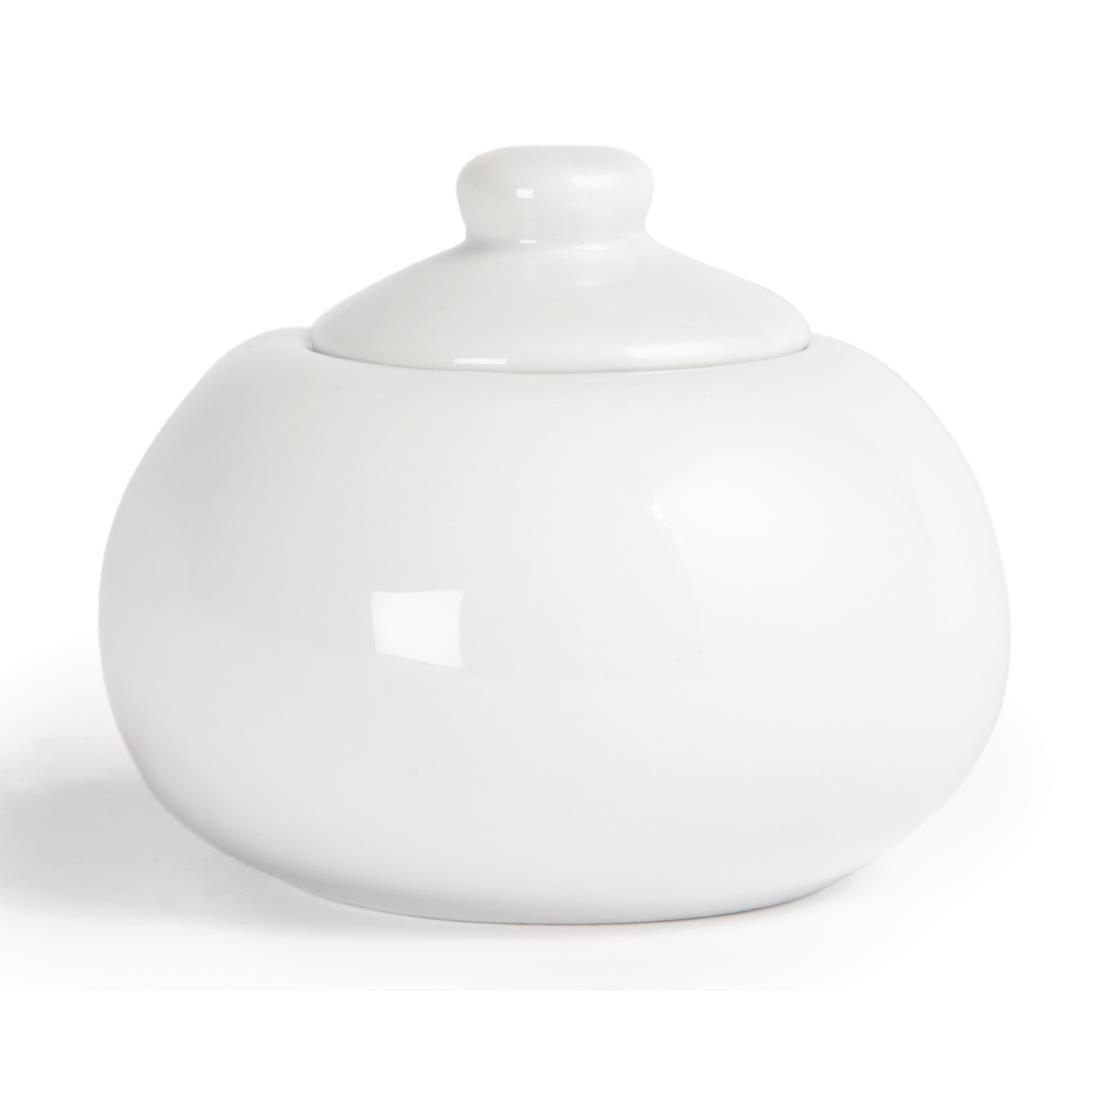 Olympia Whiteware Sugar Bowls and Lids 270ml (Pack of 12) - U818  - 2